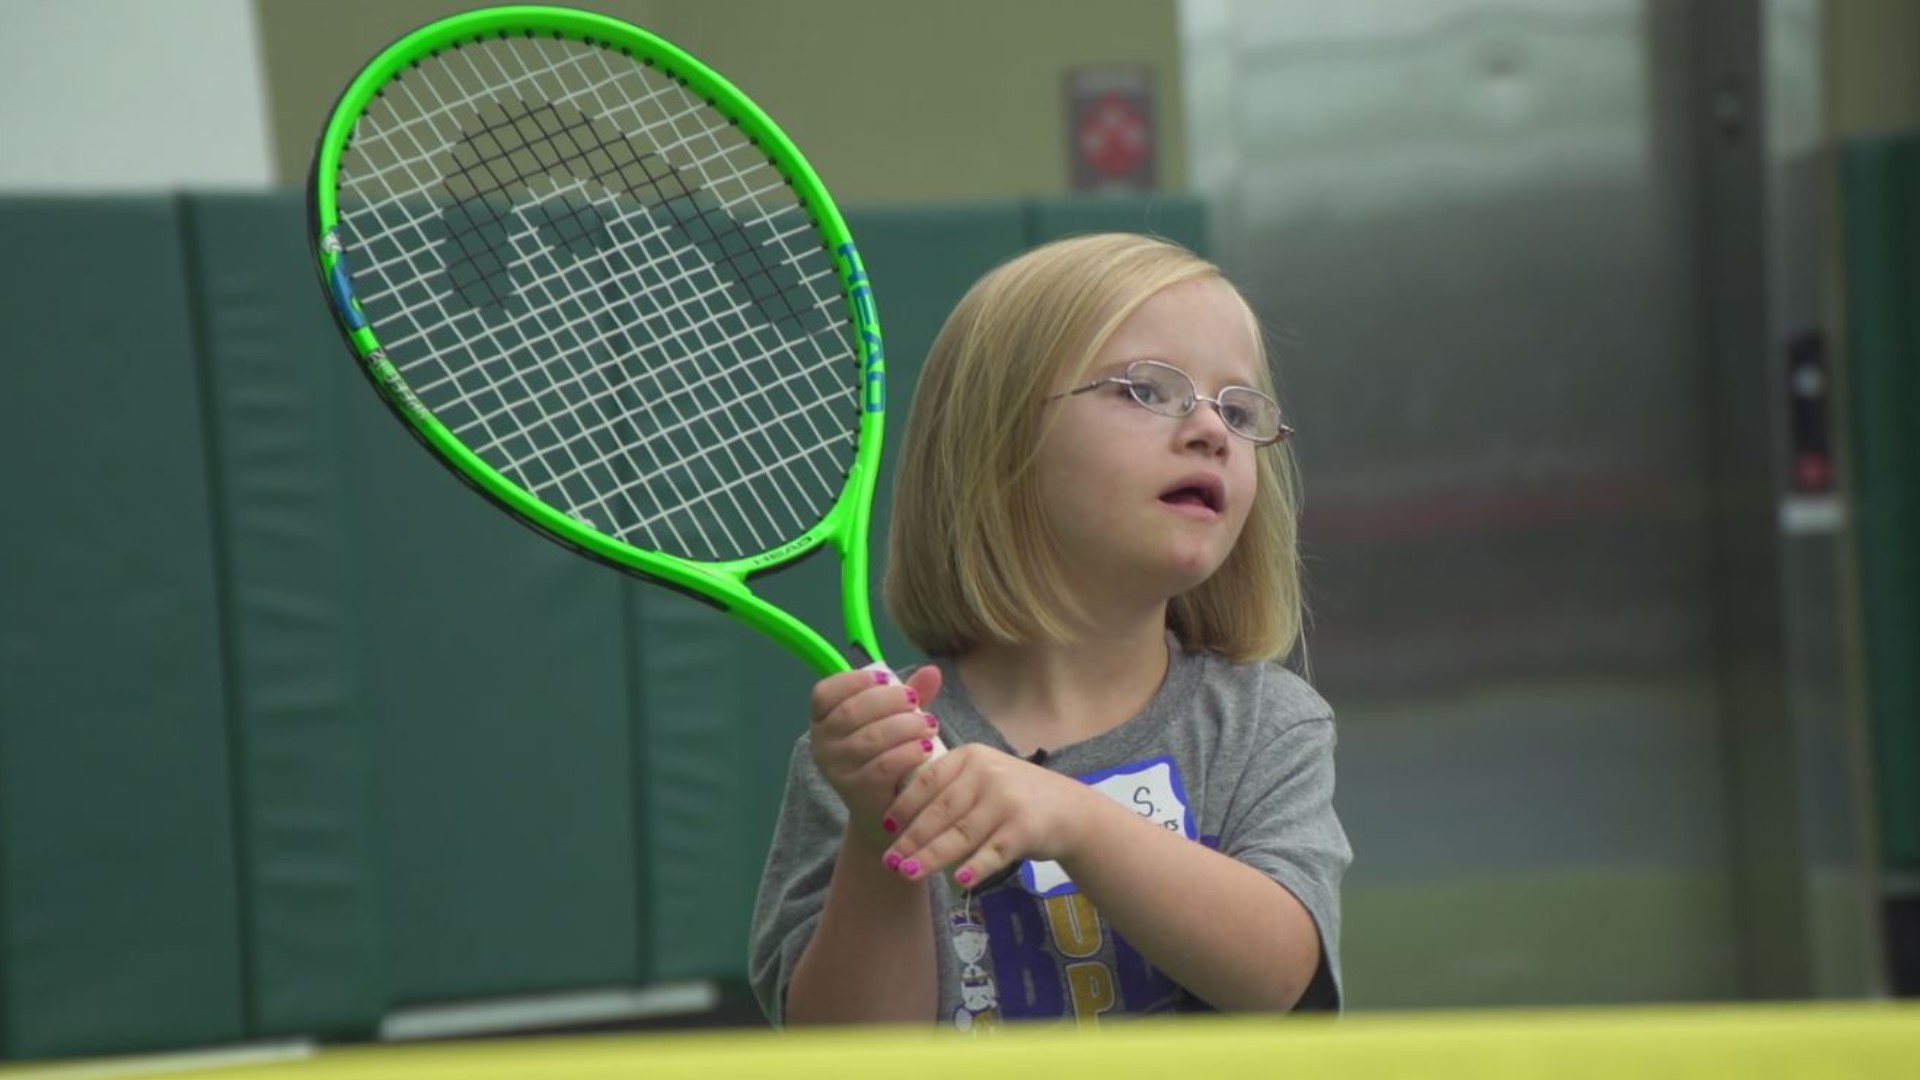 BuddyUp Tennis started a decade ago in Columbus, Ohio and this North Texas group marks one of the newest chapters in the country.